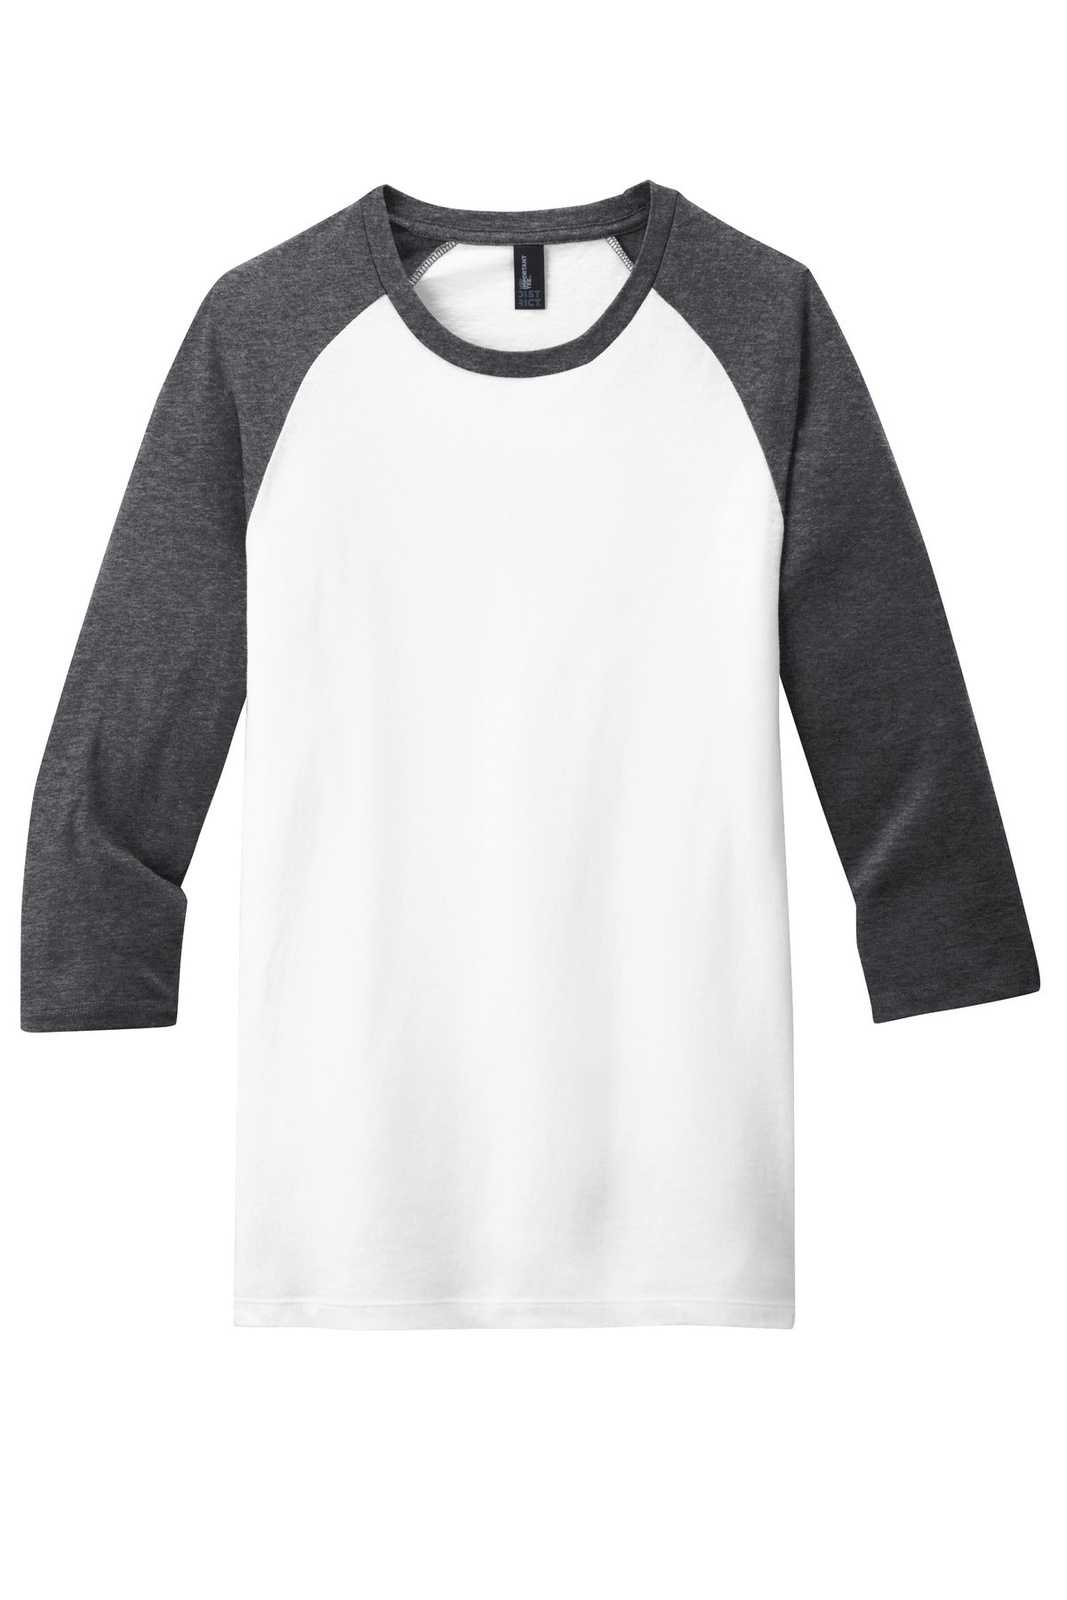 District DT6210 Very Important Tee 3/4-Sleeve Raglan - Heathered Charcoal White - HIT a Double - 5